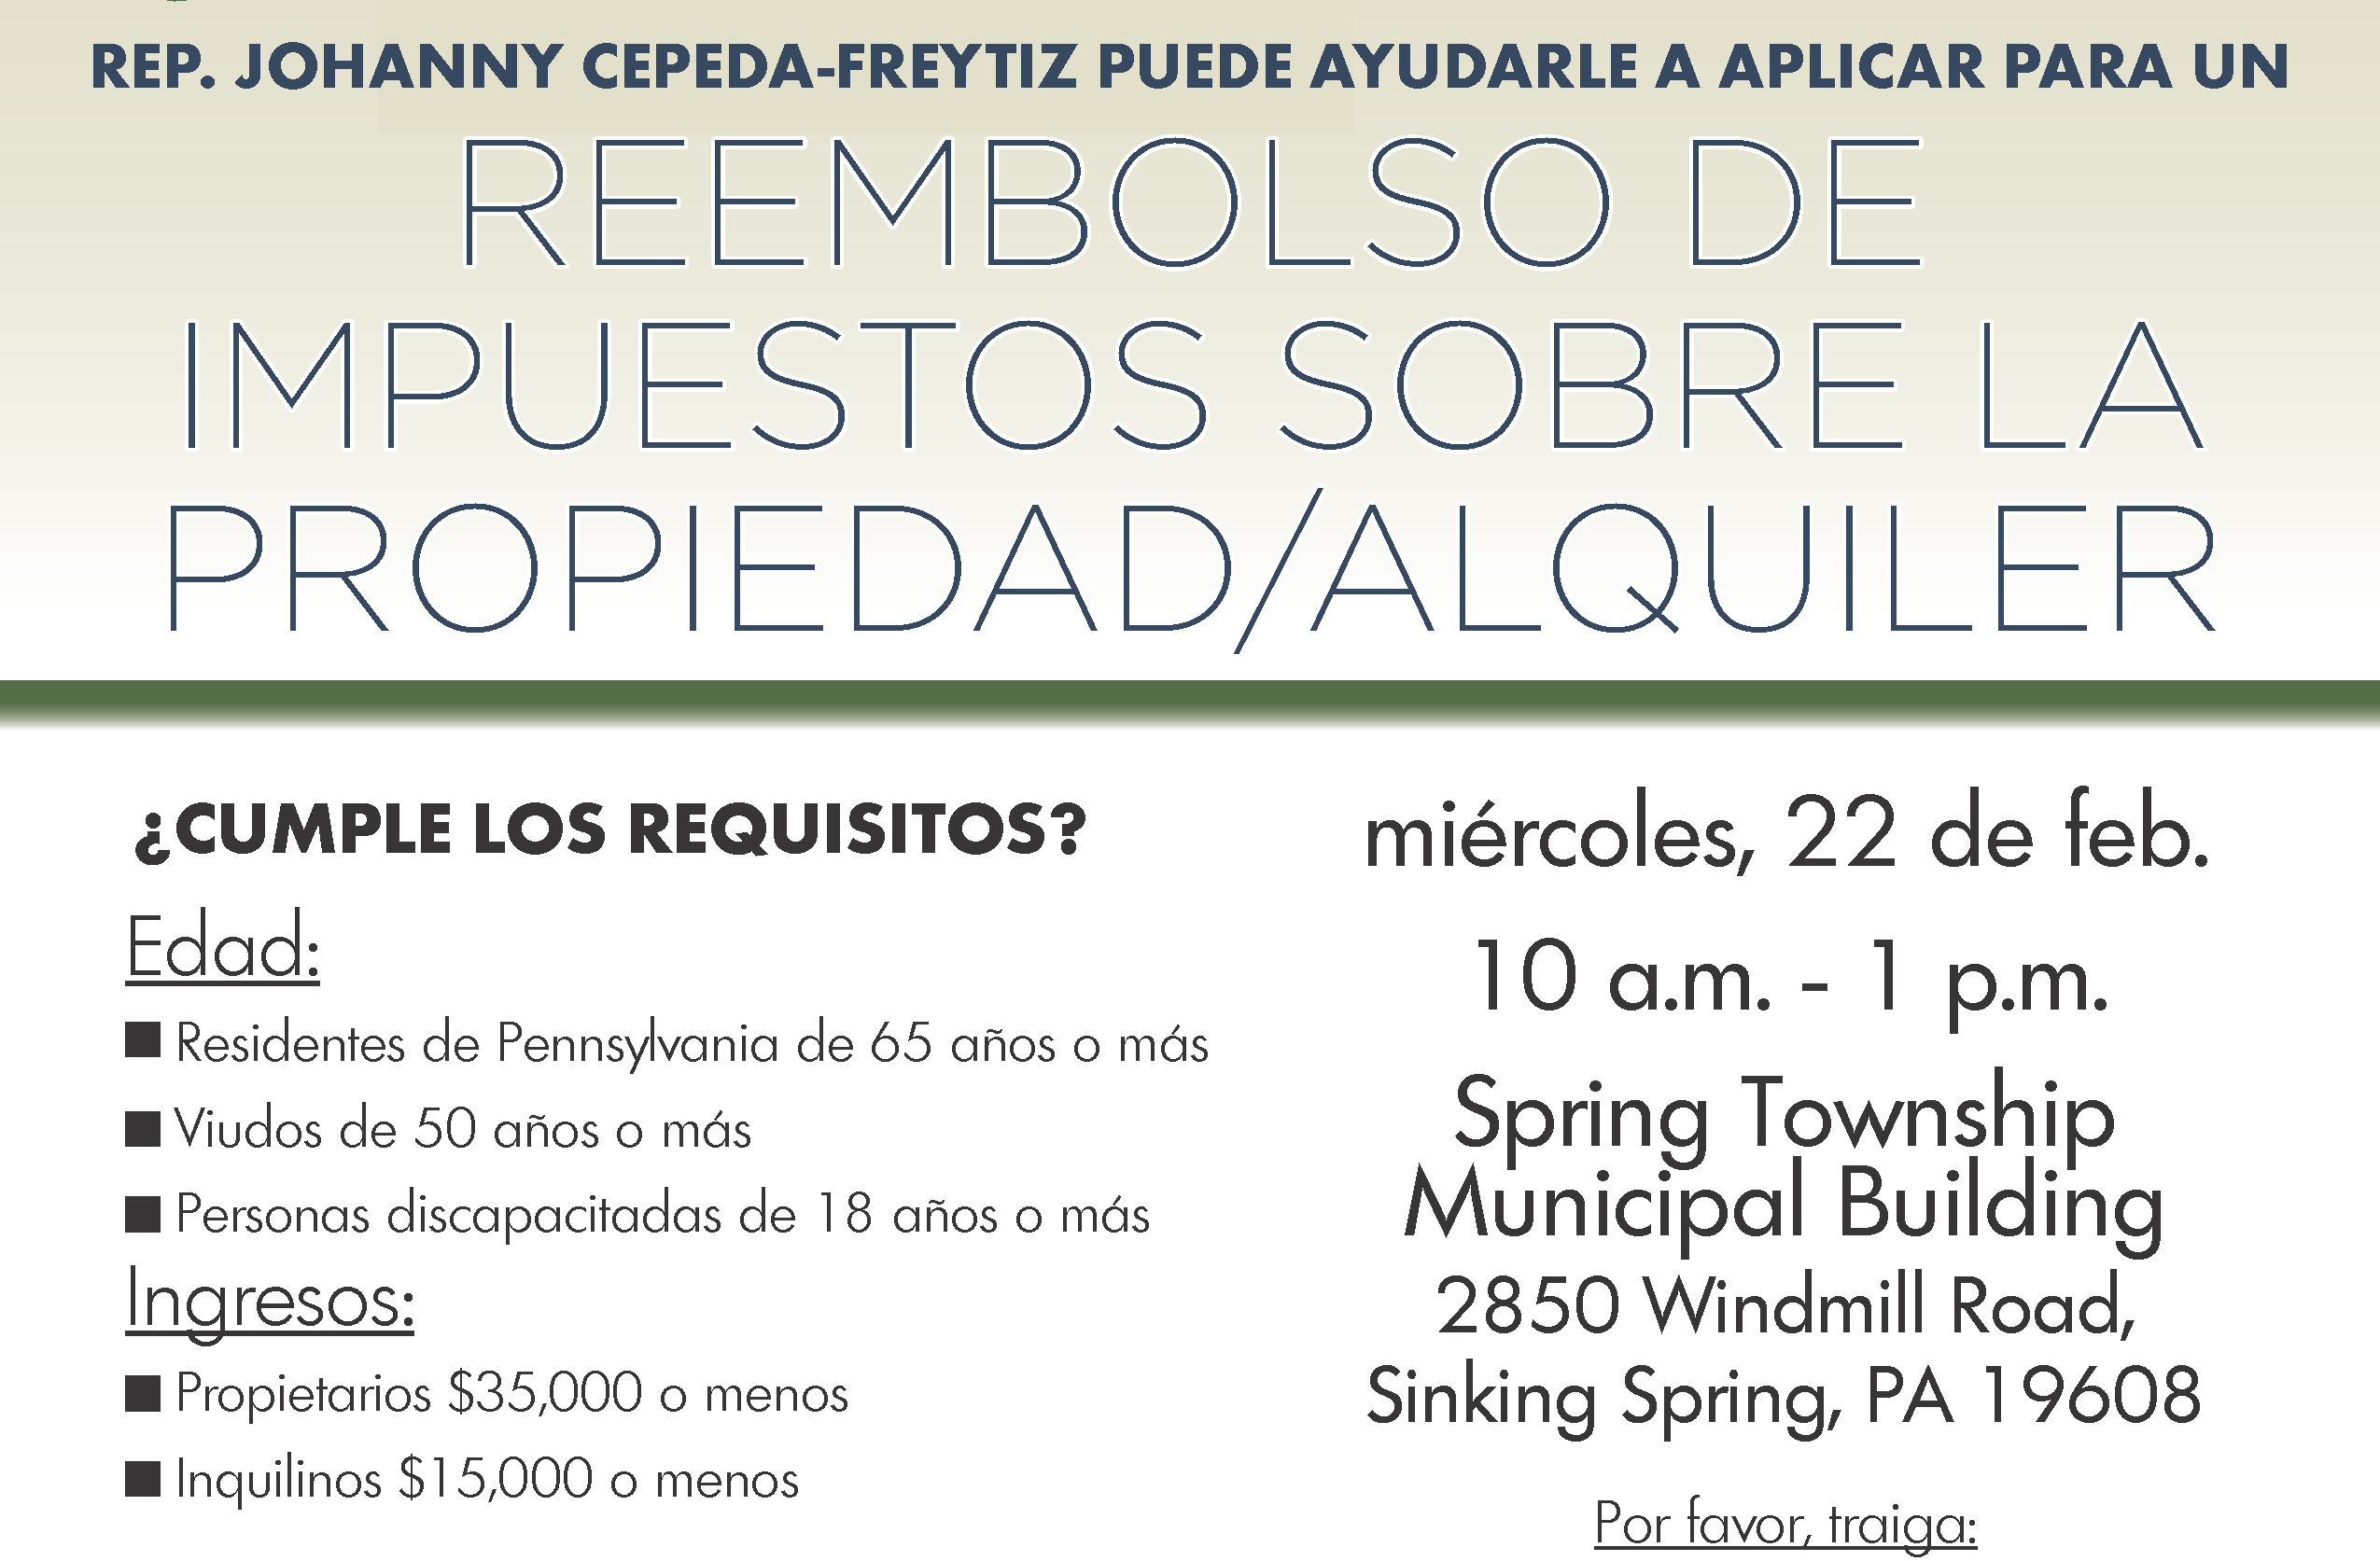 Property Tax Rent Rebate Flyer Spanish Township Of Spring